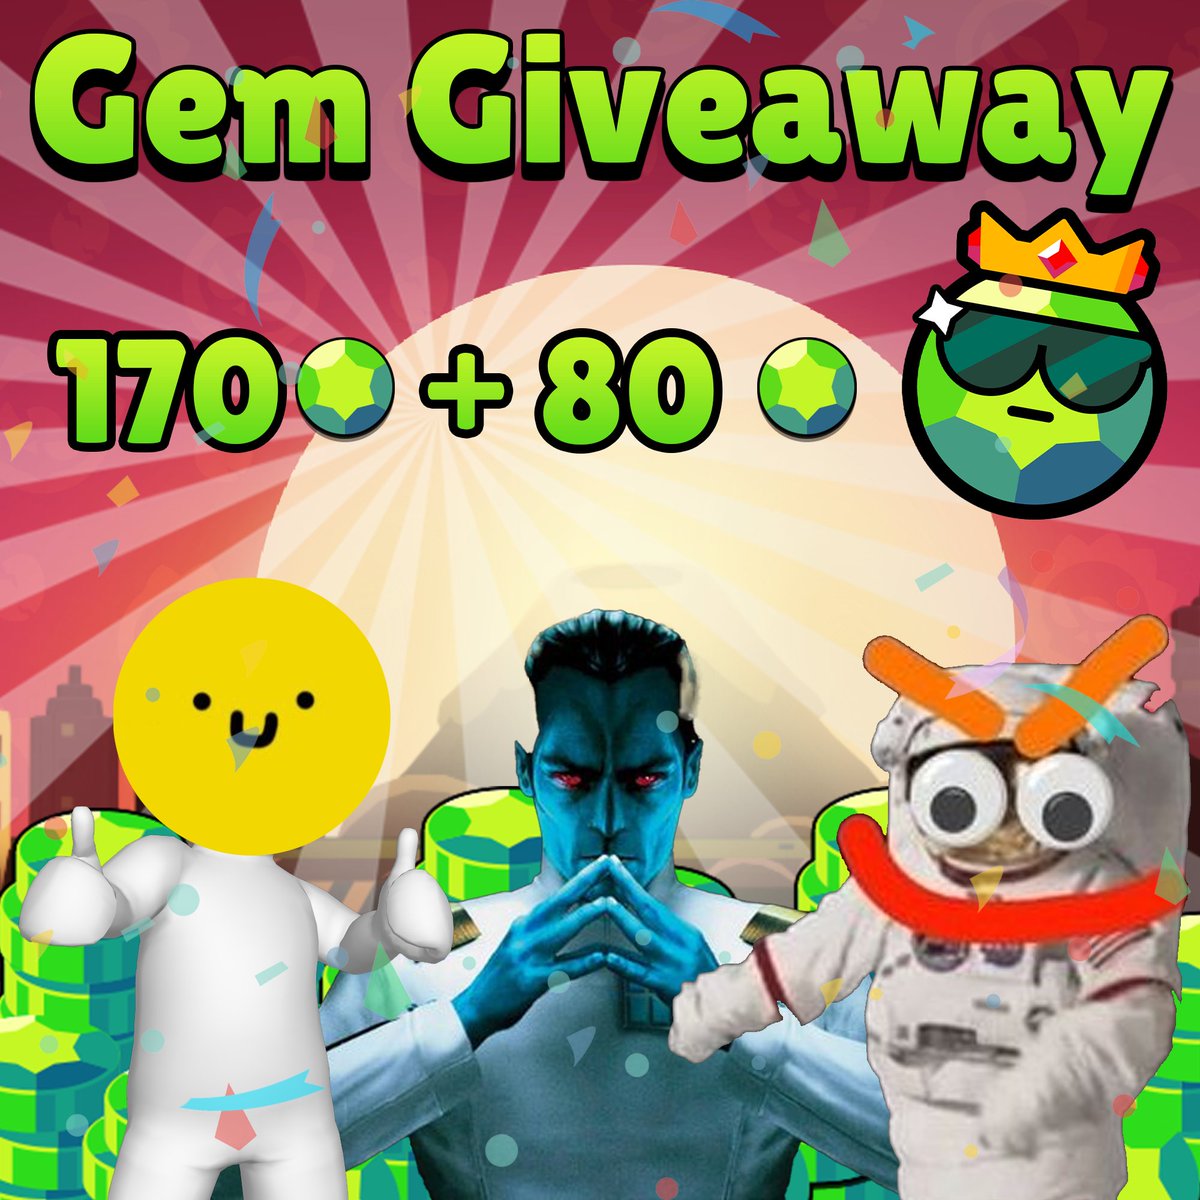 🌟 GIVEAWAY 🌟 💎 *170 Gems + 80 Gems* 💎 🎀 To join: 🎀 Follow @tontehhh @presidenthaha @thrawnnnn 👥 Like ❤️ & Repost ♻️ Tag 2 Friends 🤗 🌺 Optional: 🌺 - Follow @Psychilis✨ Ends in 7 days ⏰ #BrawlStarsGiveaway #SORTEO #Giveaways #BrawlStars